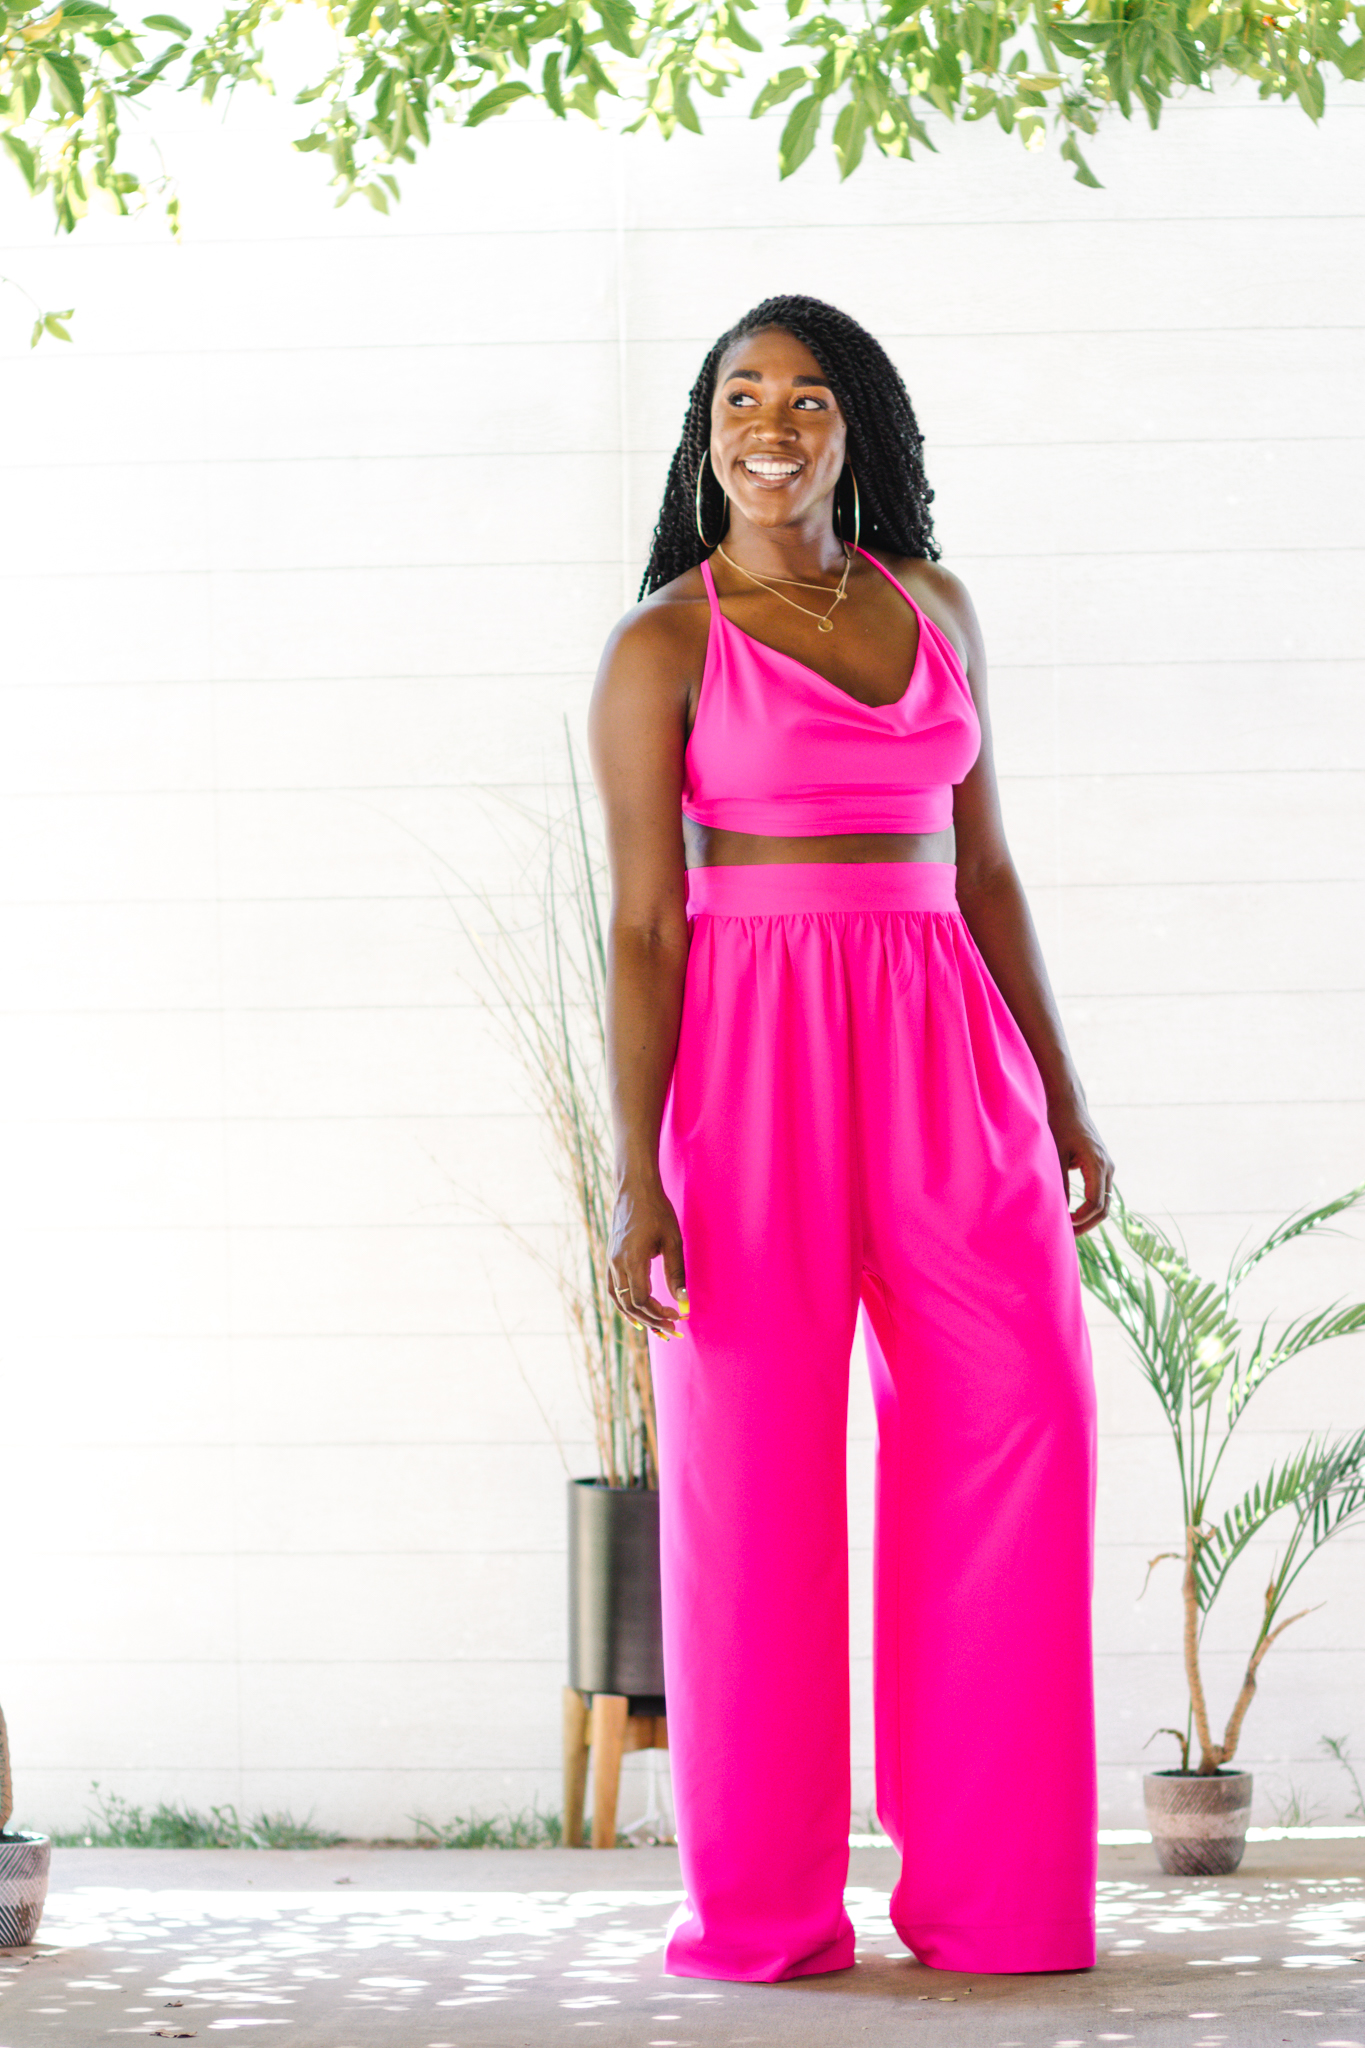 https://montoyamayo.com/wp-content/uploads/2021/08/DIY-Neon-pink-back-out-cowl-top-and-wide-leg-pants-Simplicity-8605-S8605-10.jpg